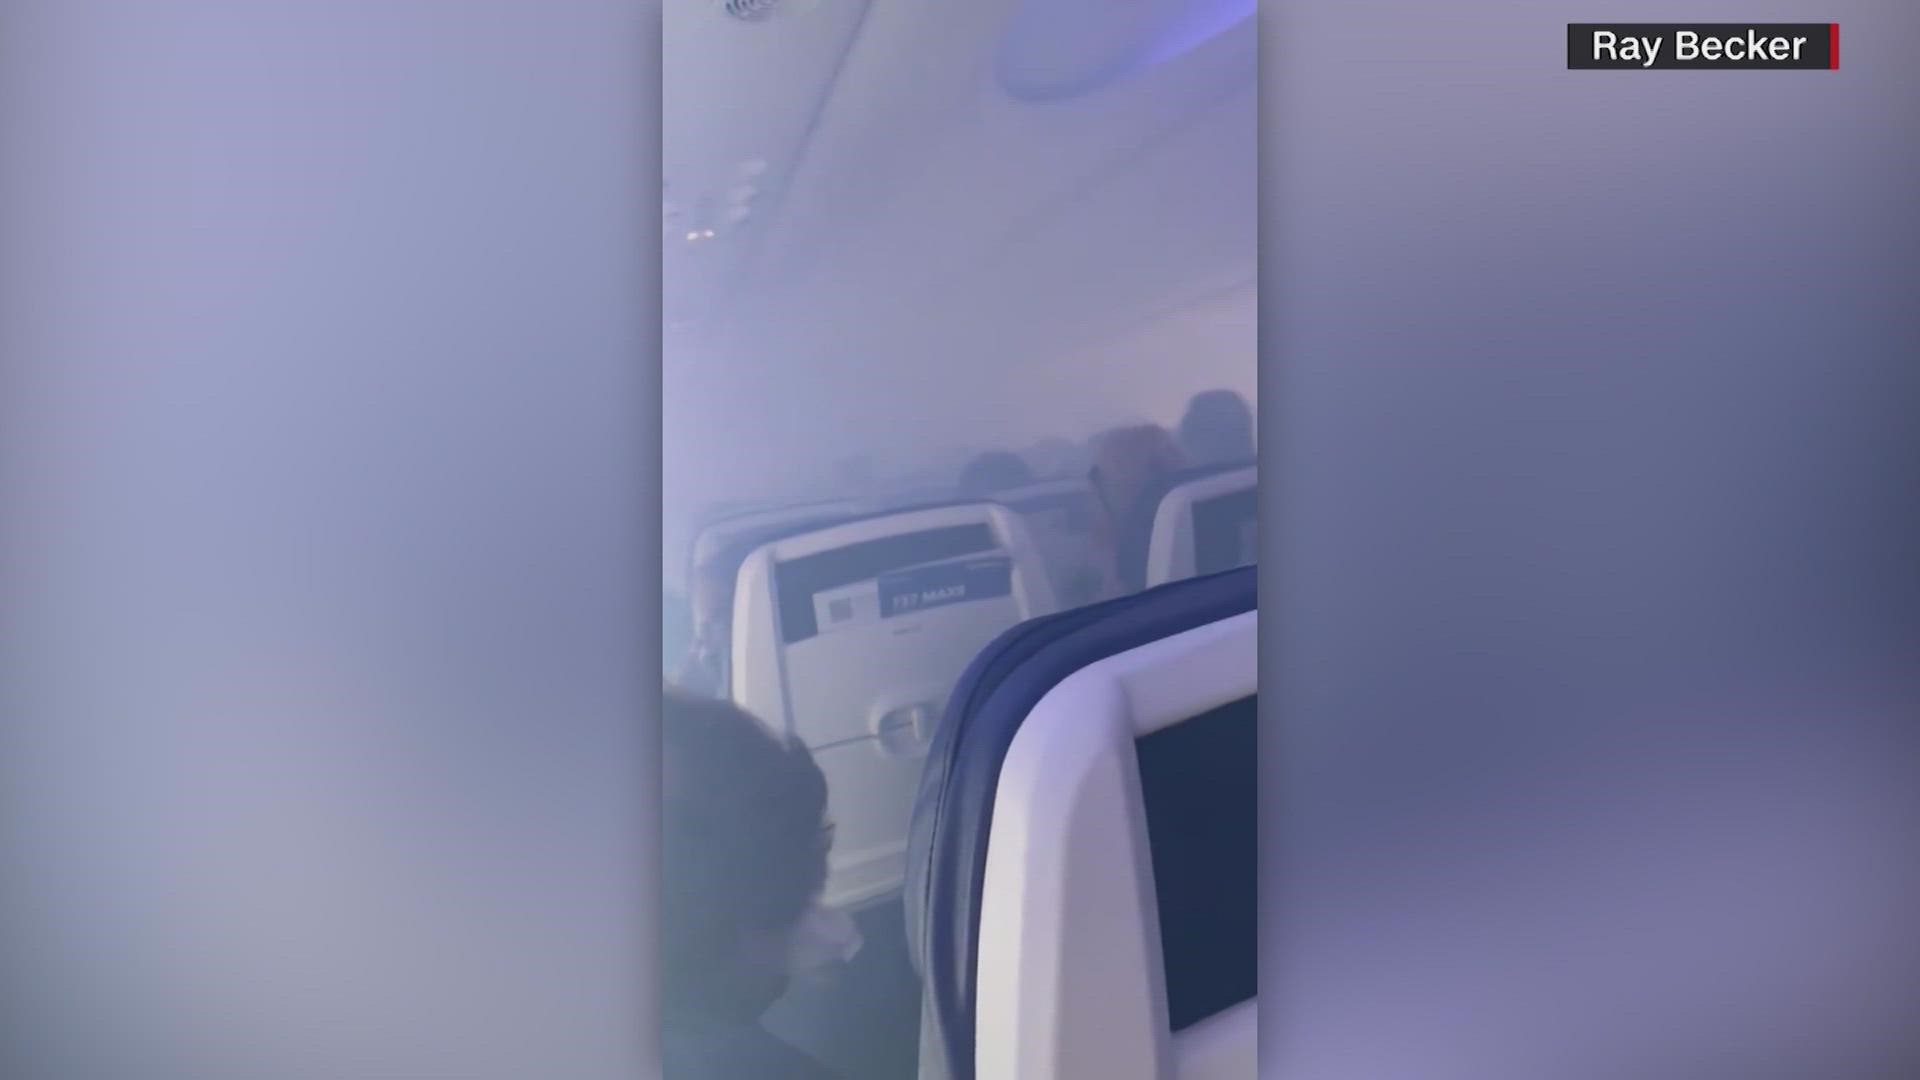 A Southwest Airlines flight headed to Fort Lauderdale from Havana, Cuba had to turn around after a bird strike.